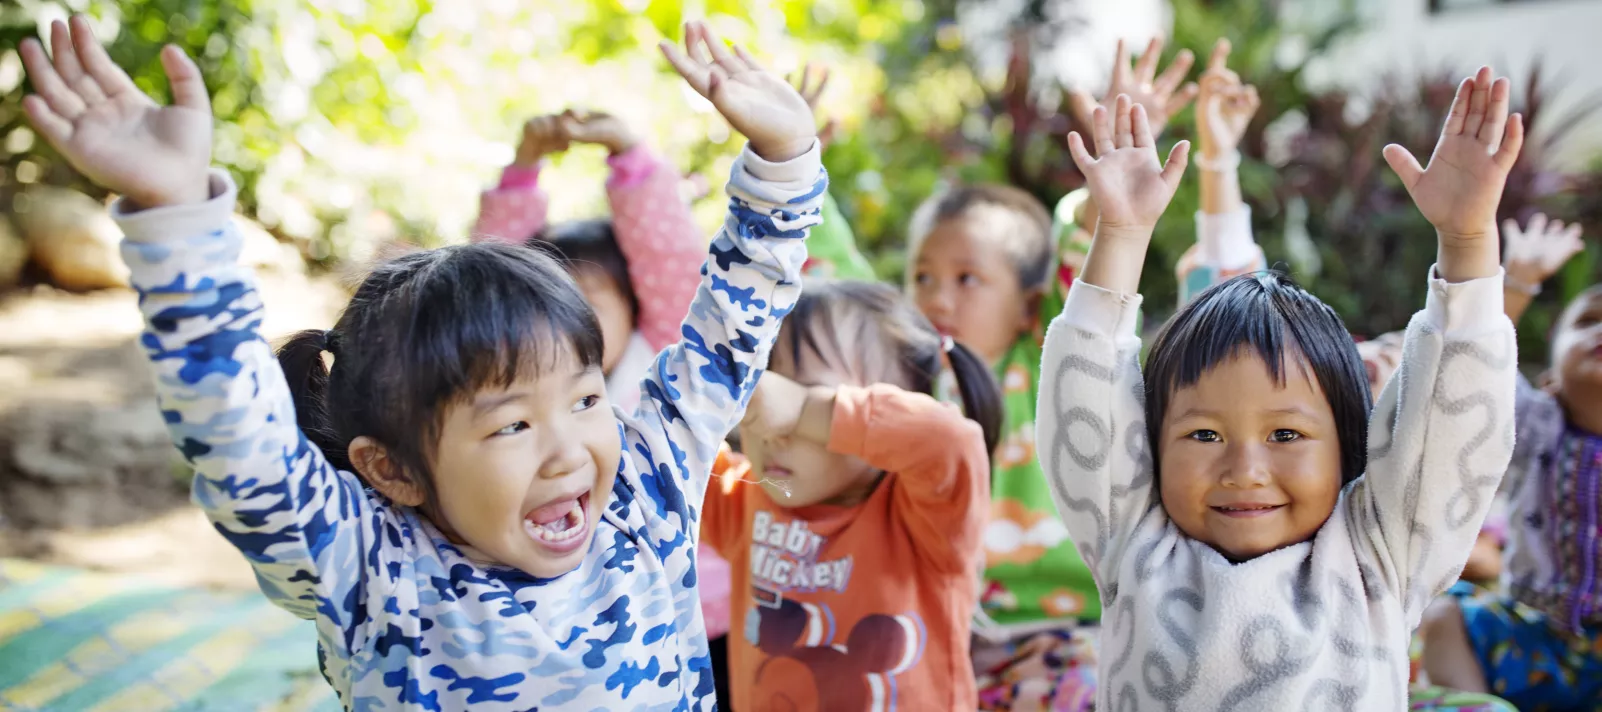 A group of young children are happily raising their hands.